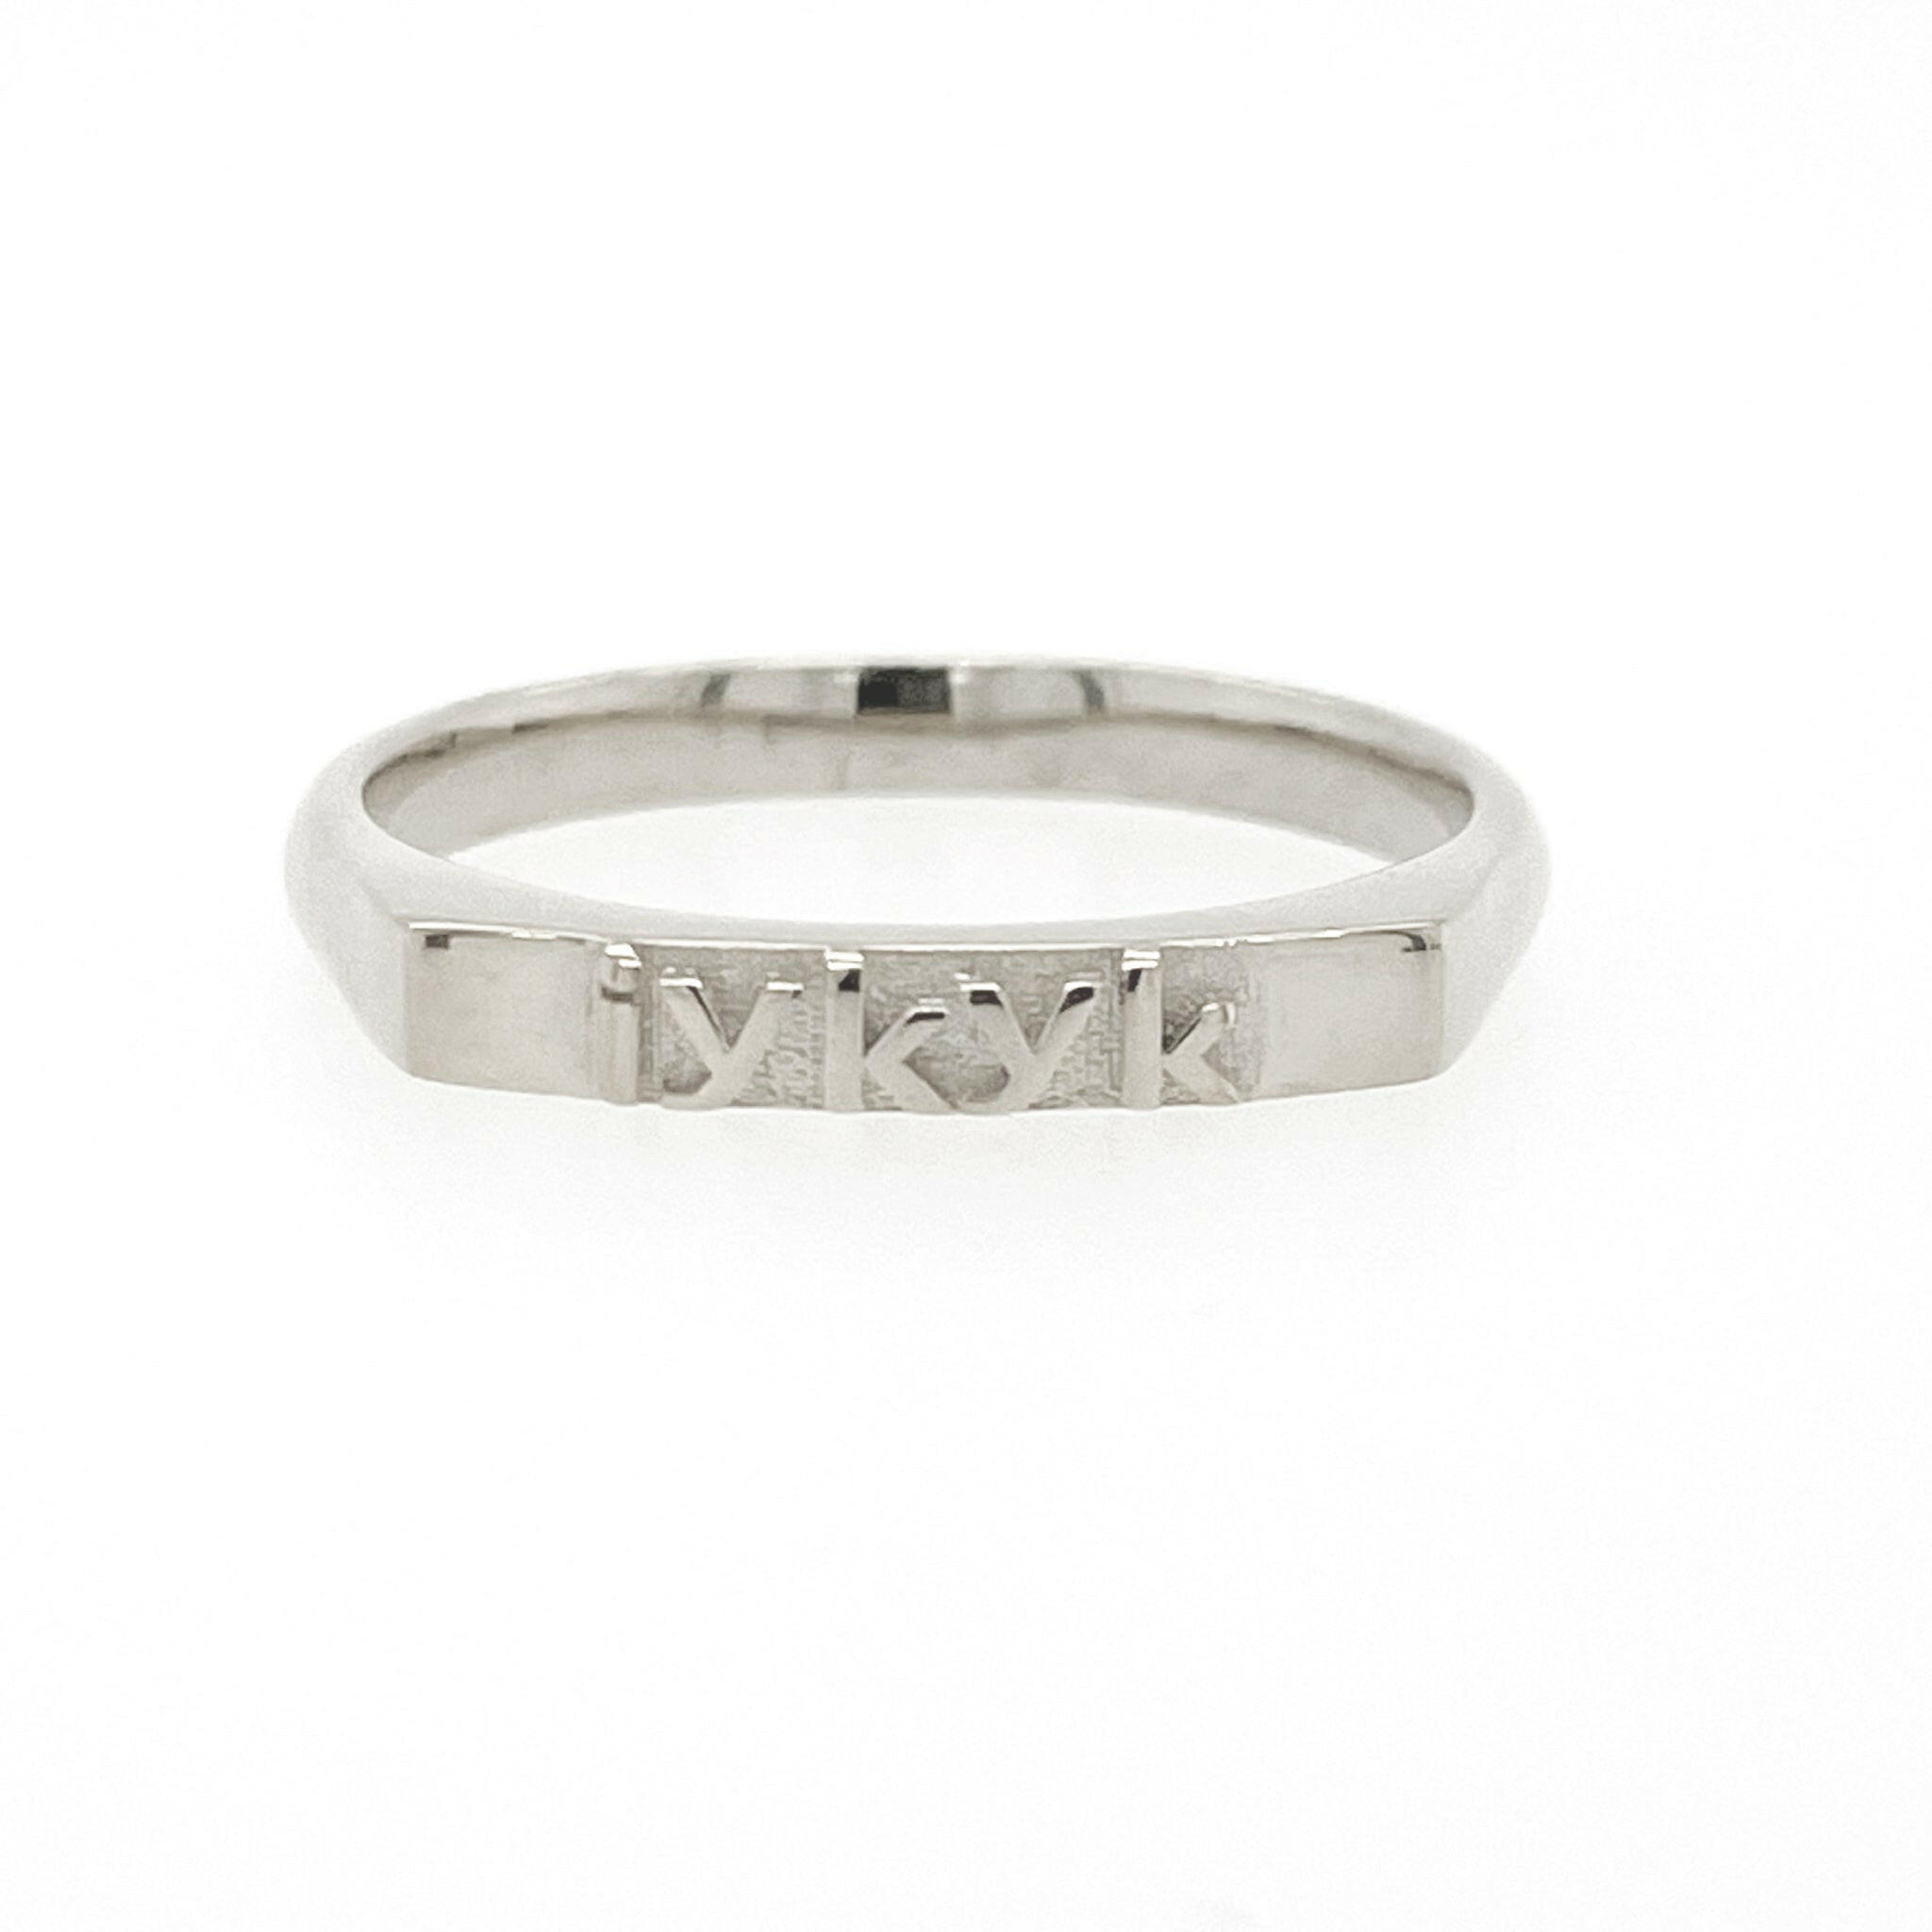 front view of 14 karat white gold ring with text that reads "if you know you know" acronym "i y k y k"